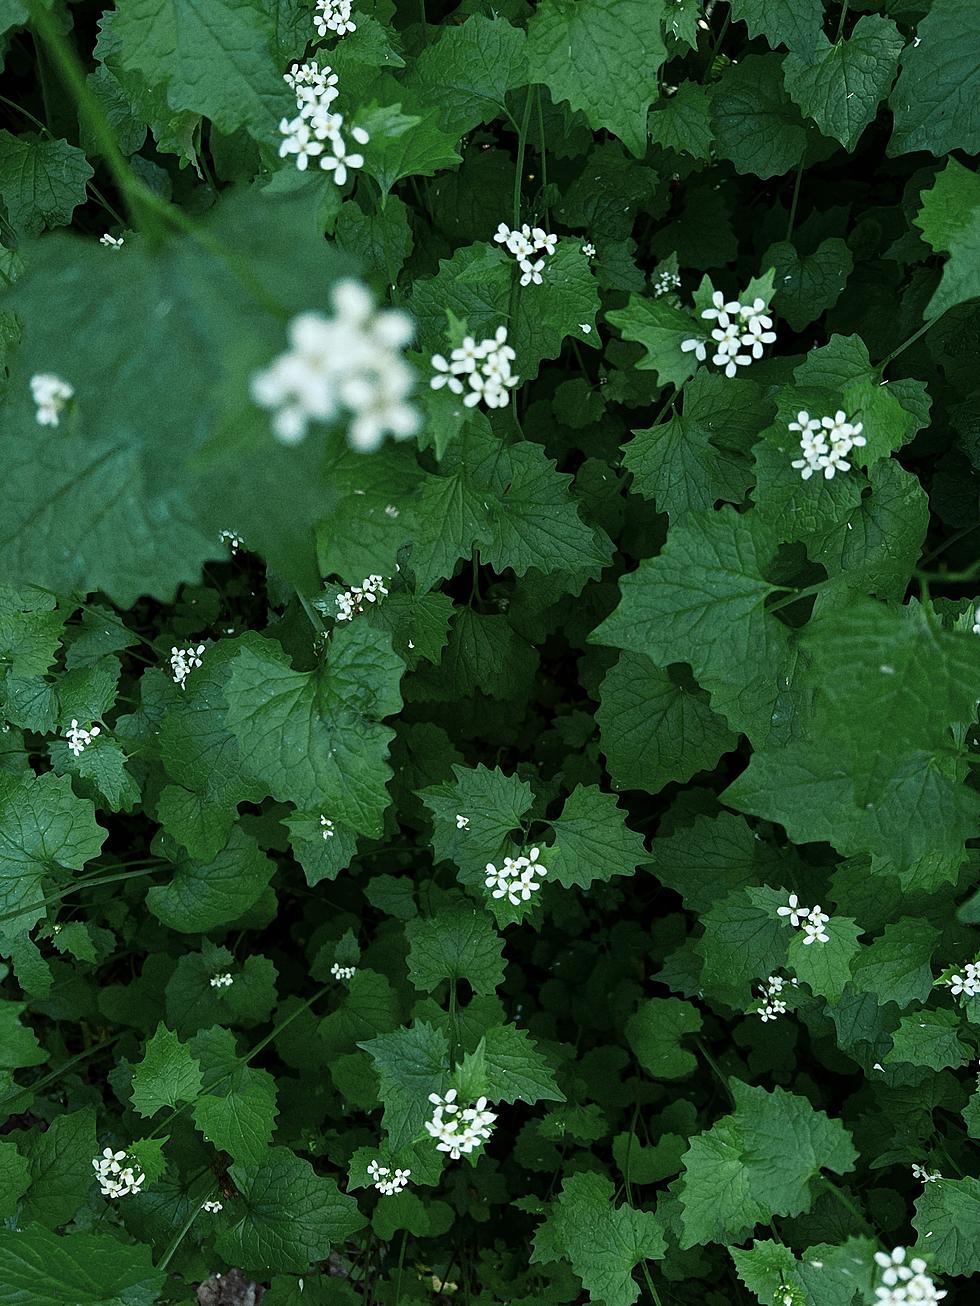 Is This Edible Yet Invasive Species Of Minnesota Plant Lurking In Your Backyard?